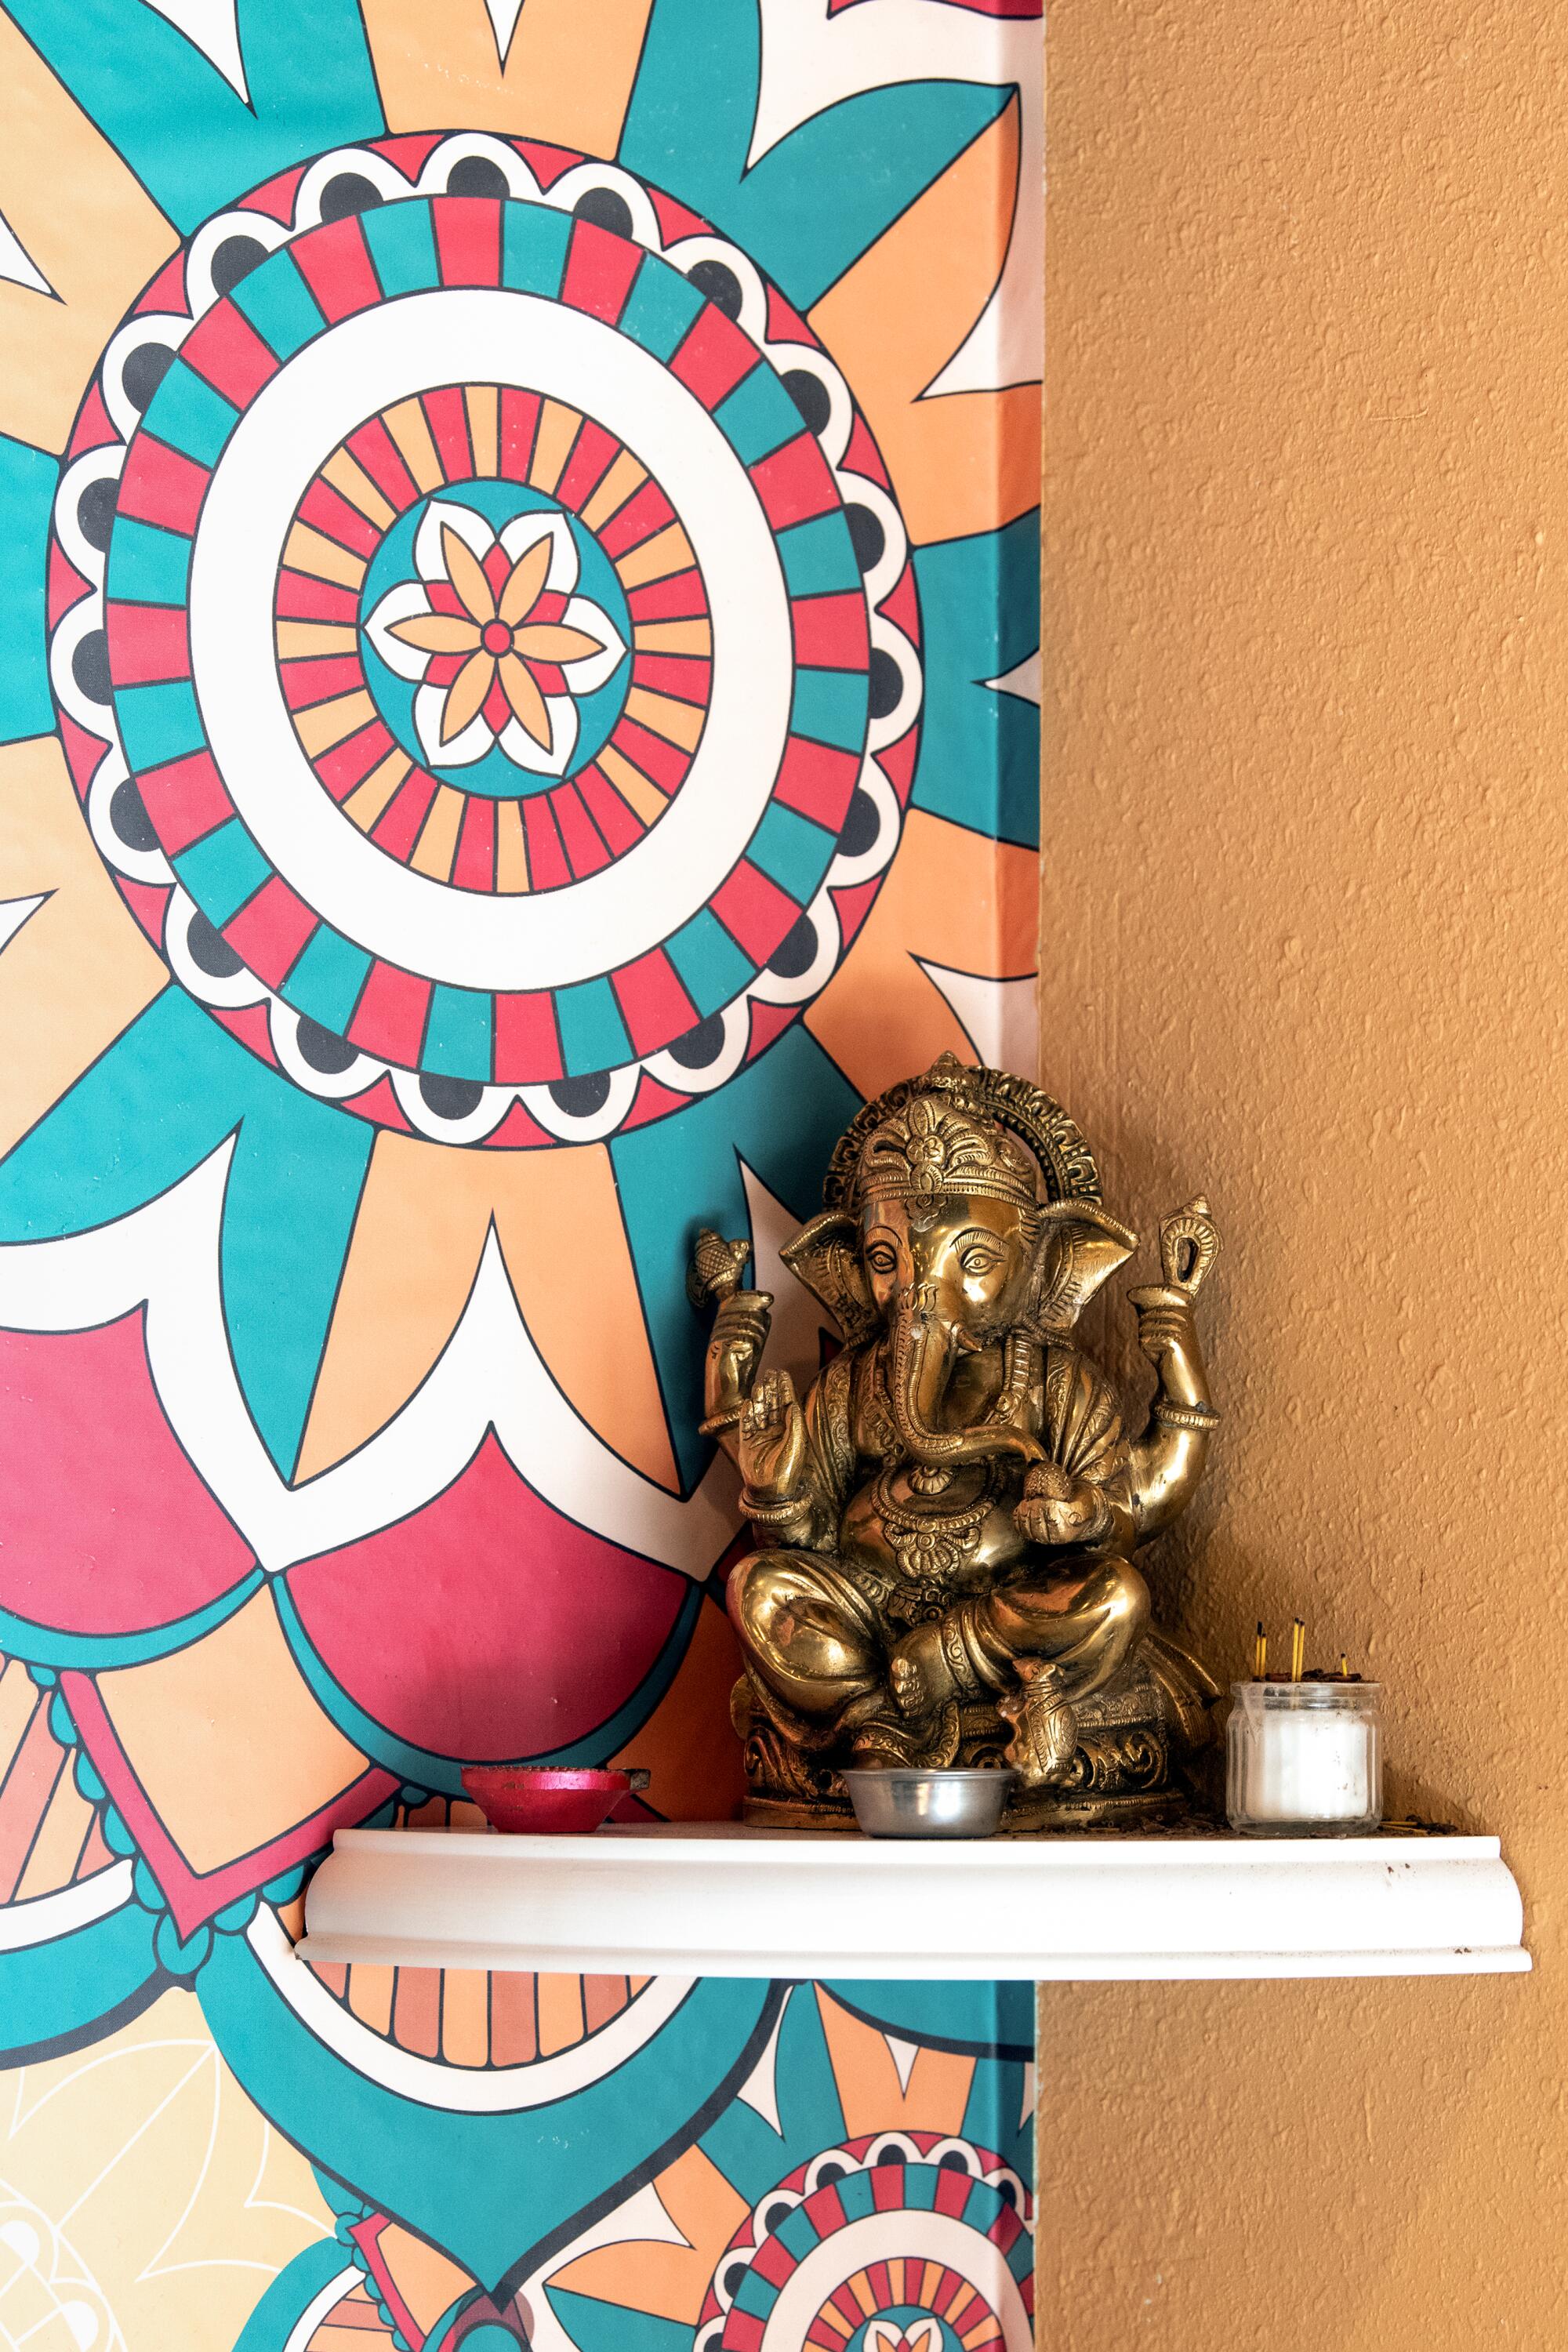 A statue of Ganesha on a corner shelf in front of a colorful patterned wall